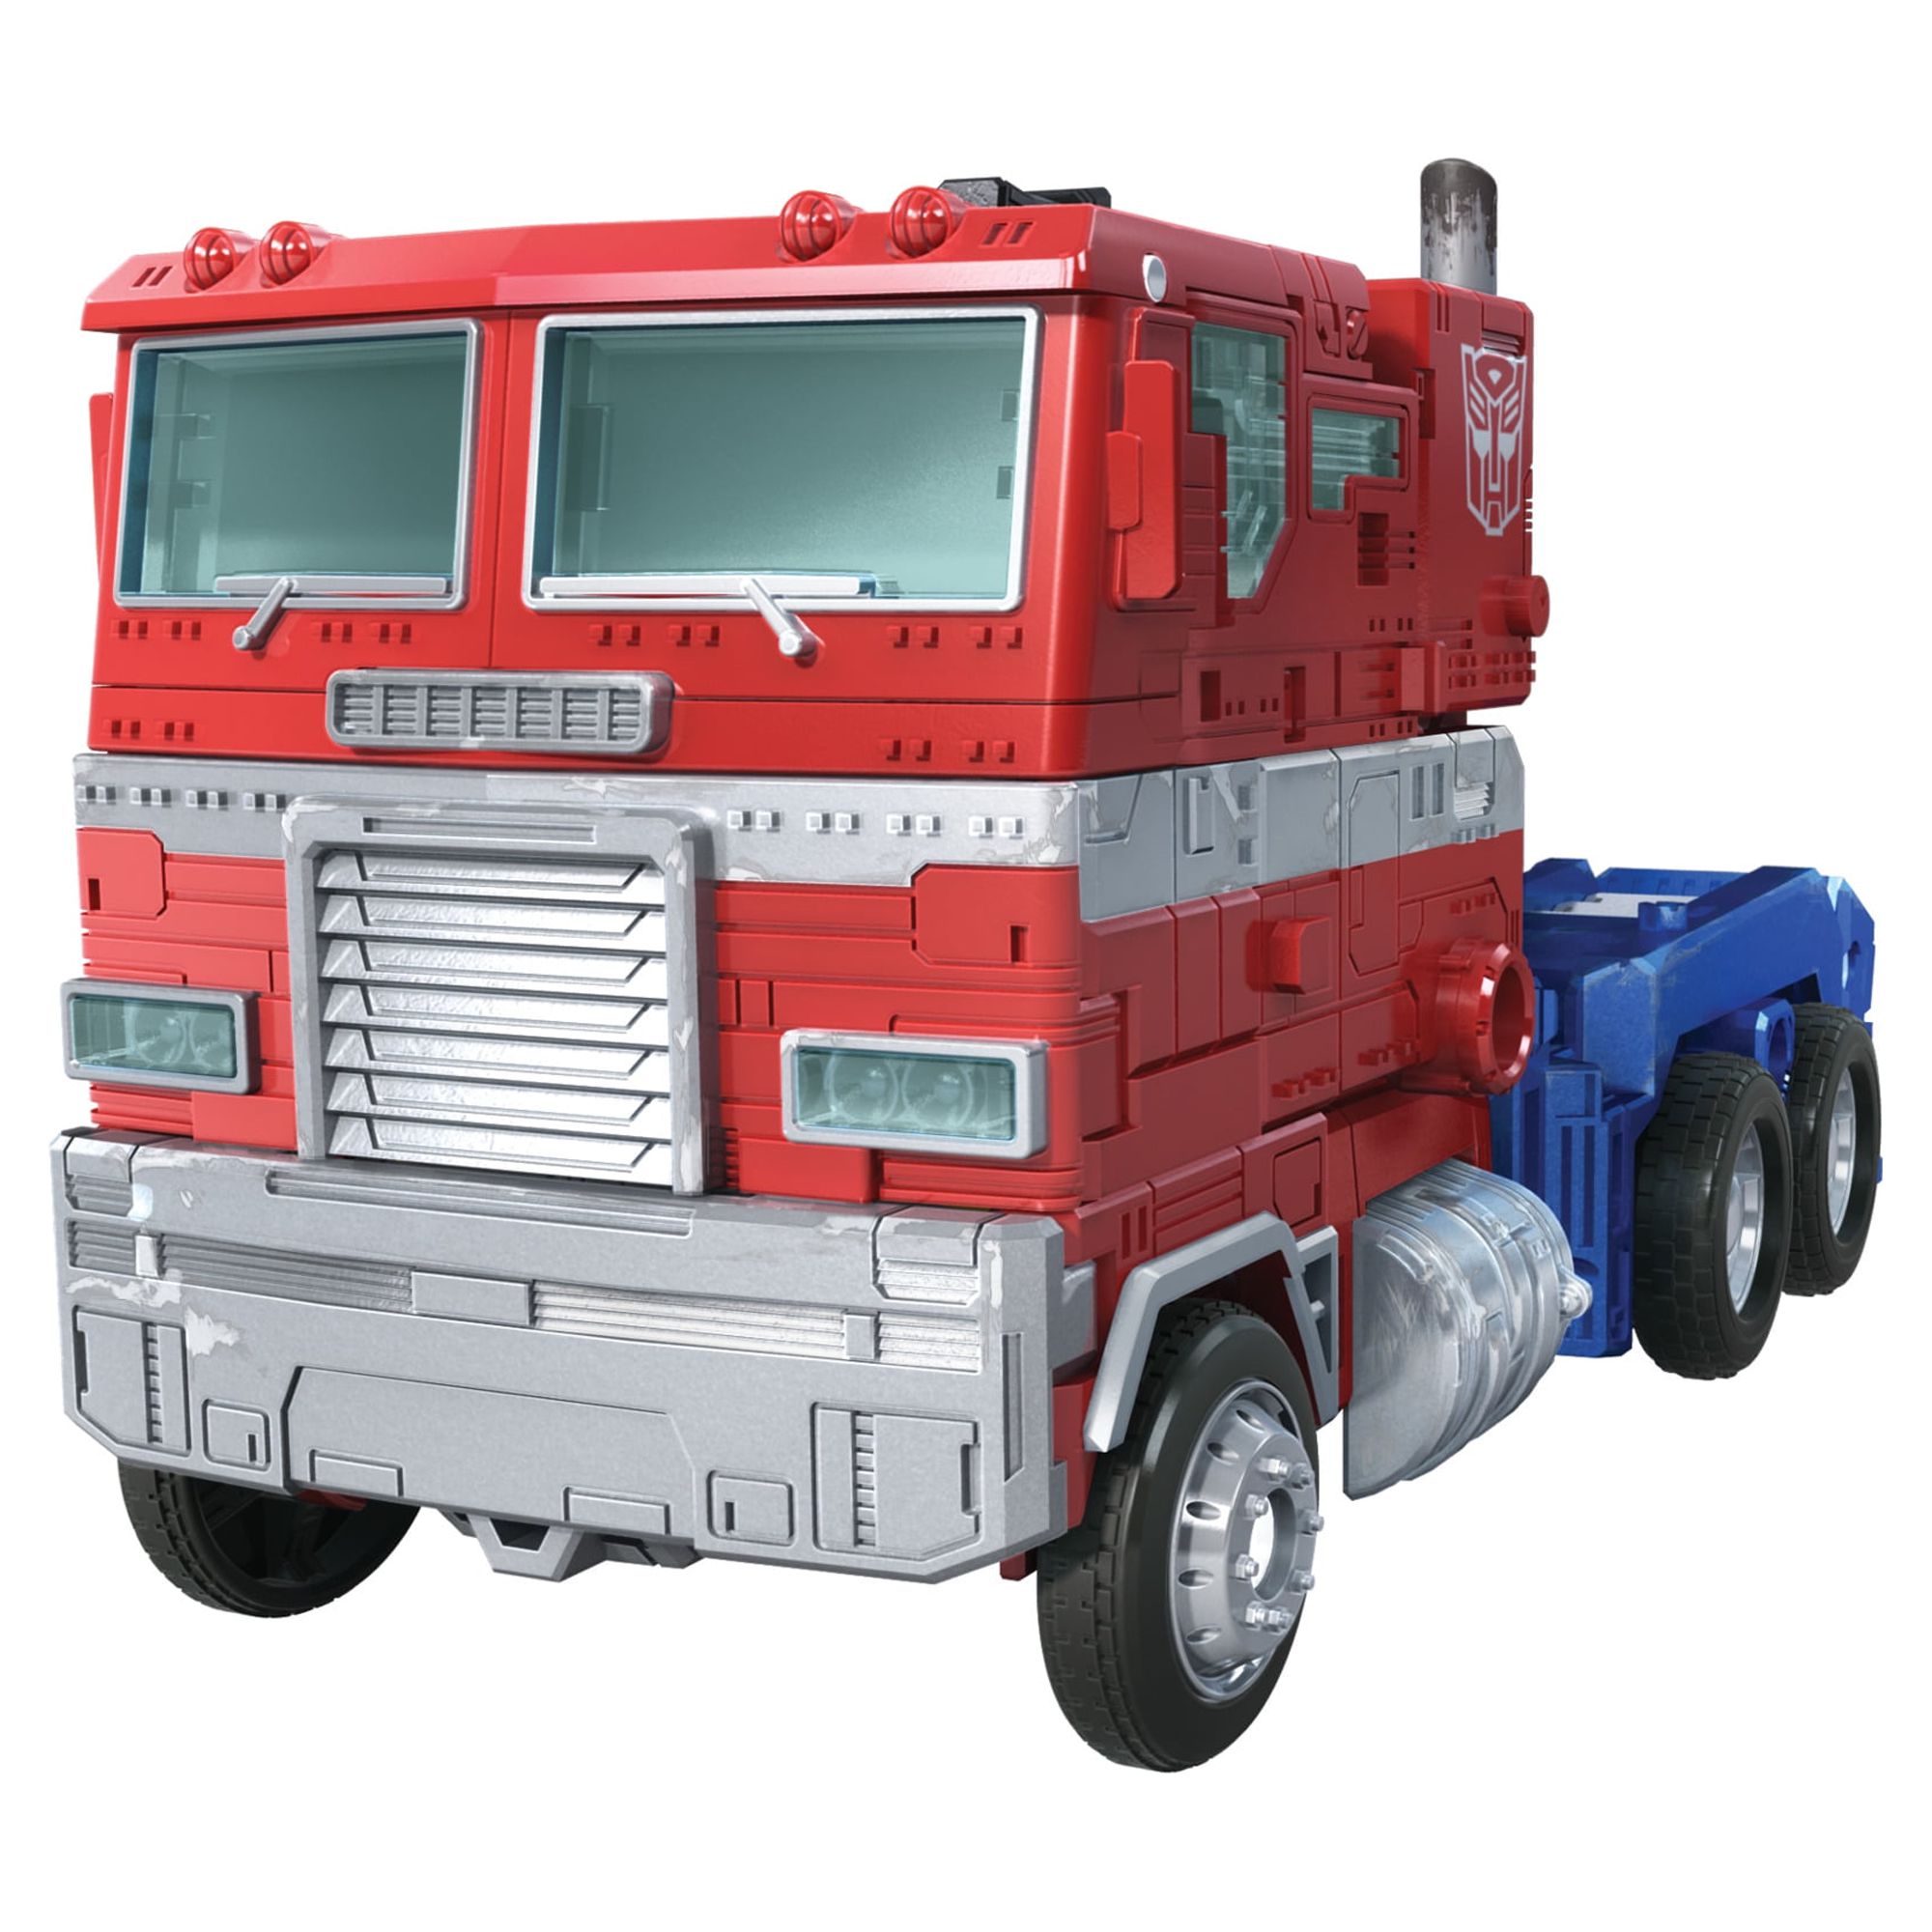 Transformers: War for Cybertron Optimus Prime Kids Toy Action Figure for Boys and Girls (7") - image 5 of 6